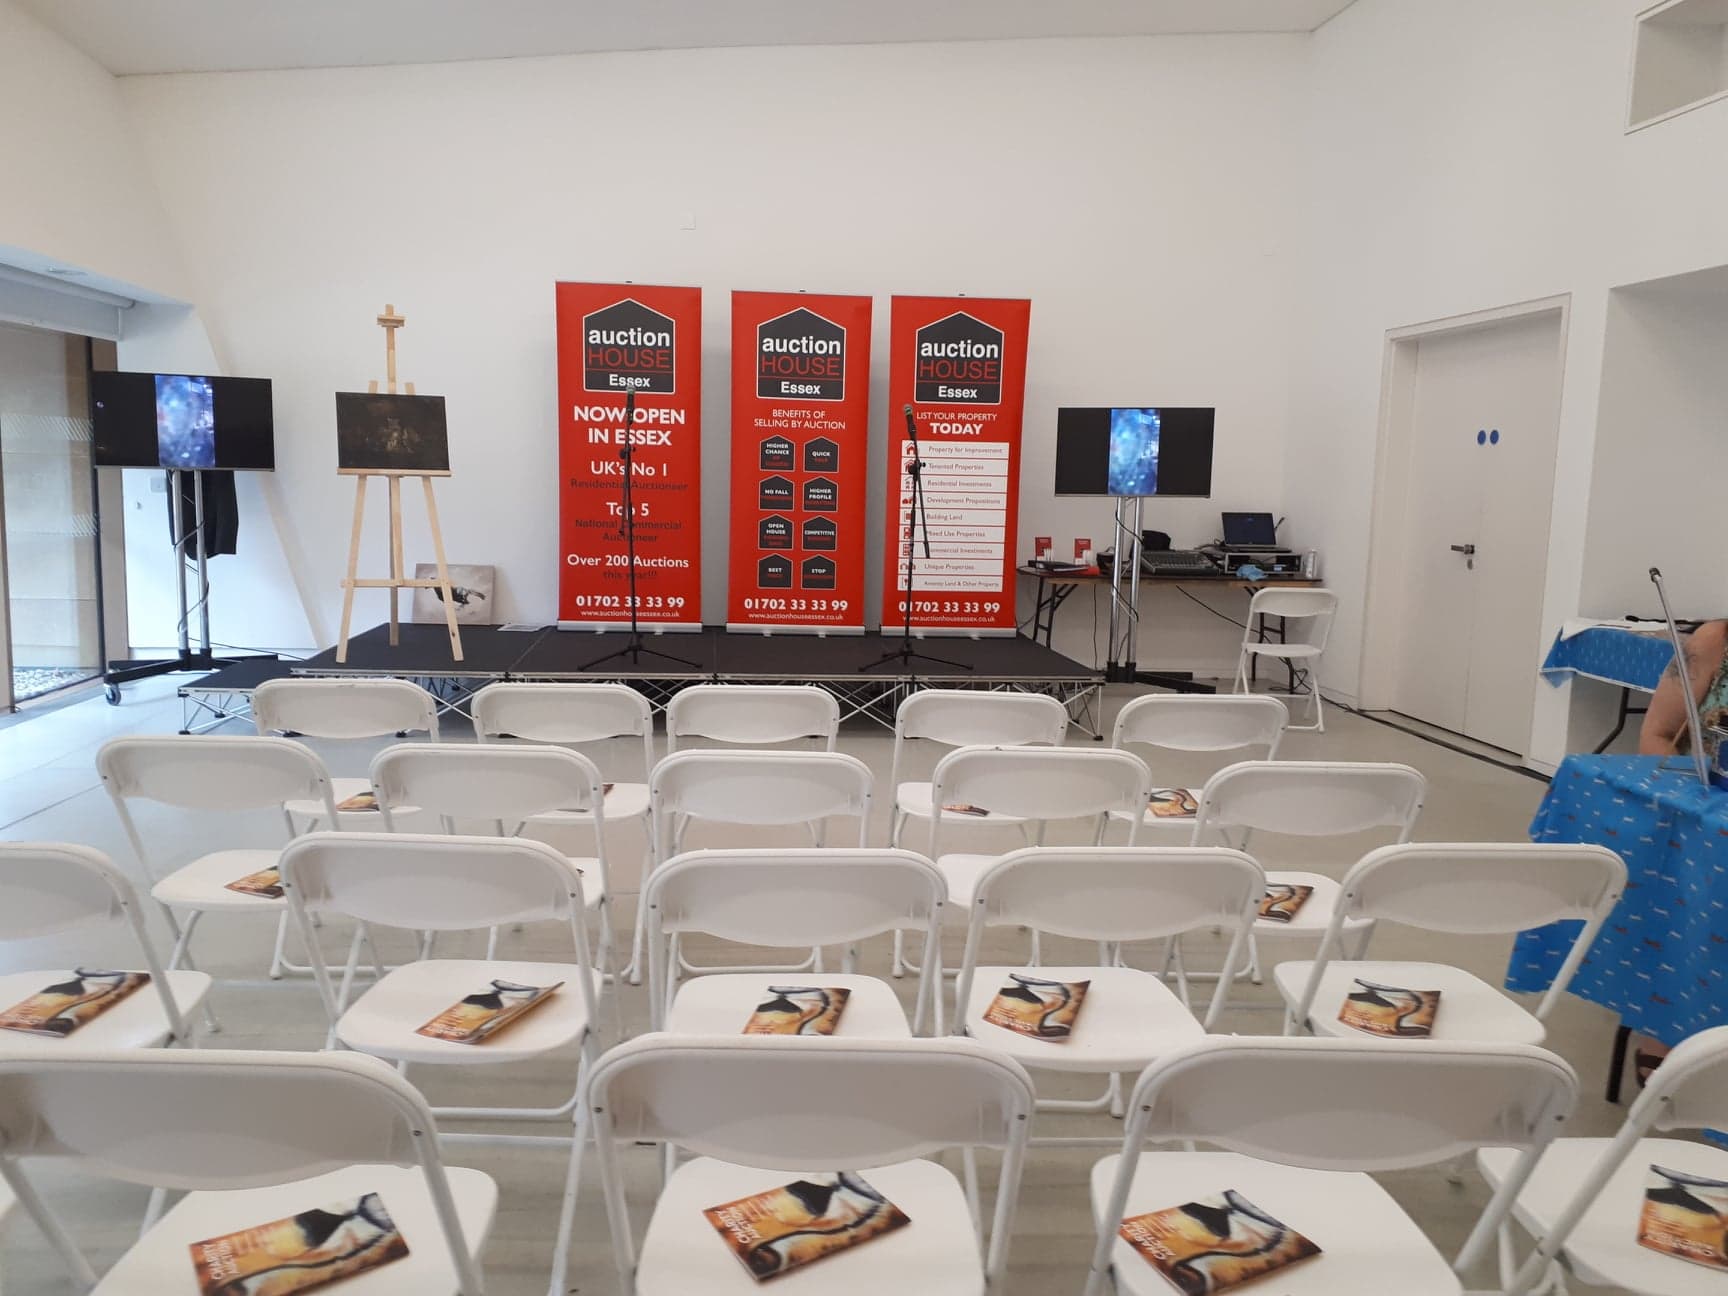 owap ar our fundraiser event set up auction section of the room firstsite colchester uk 20 JULY 2018.jpg